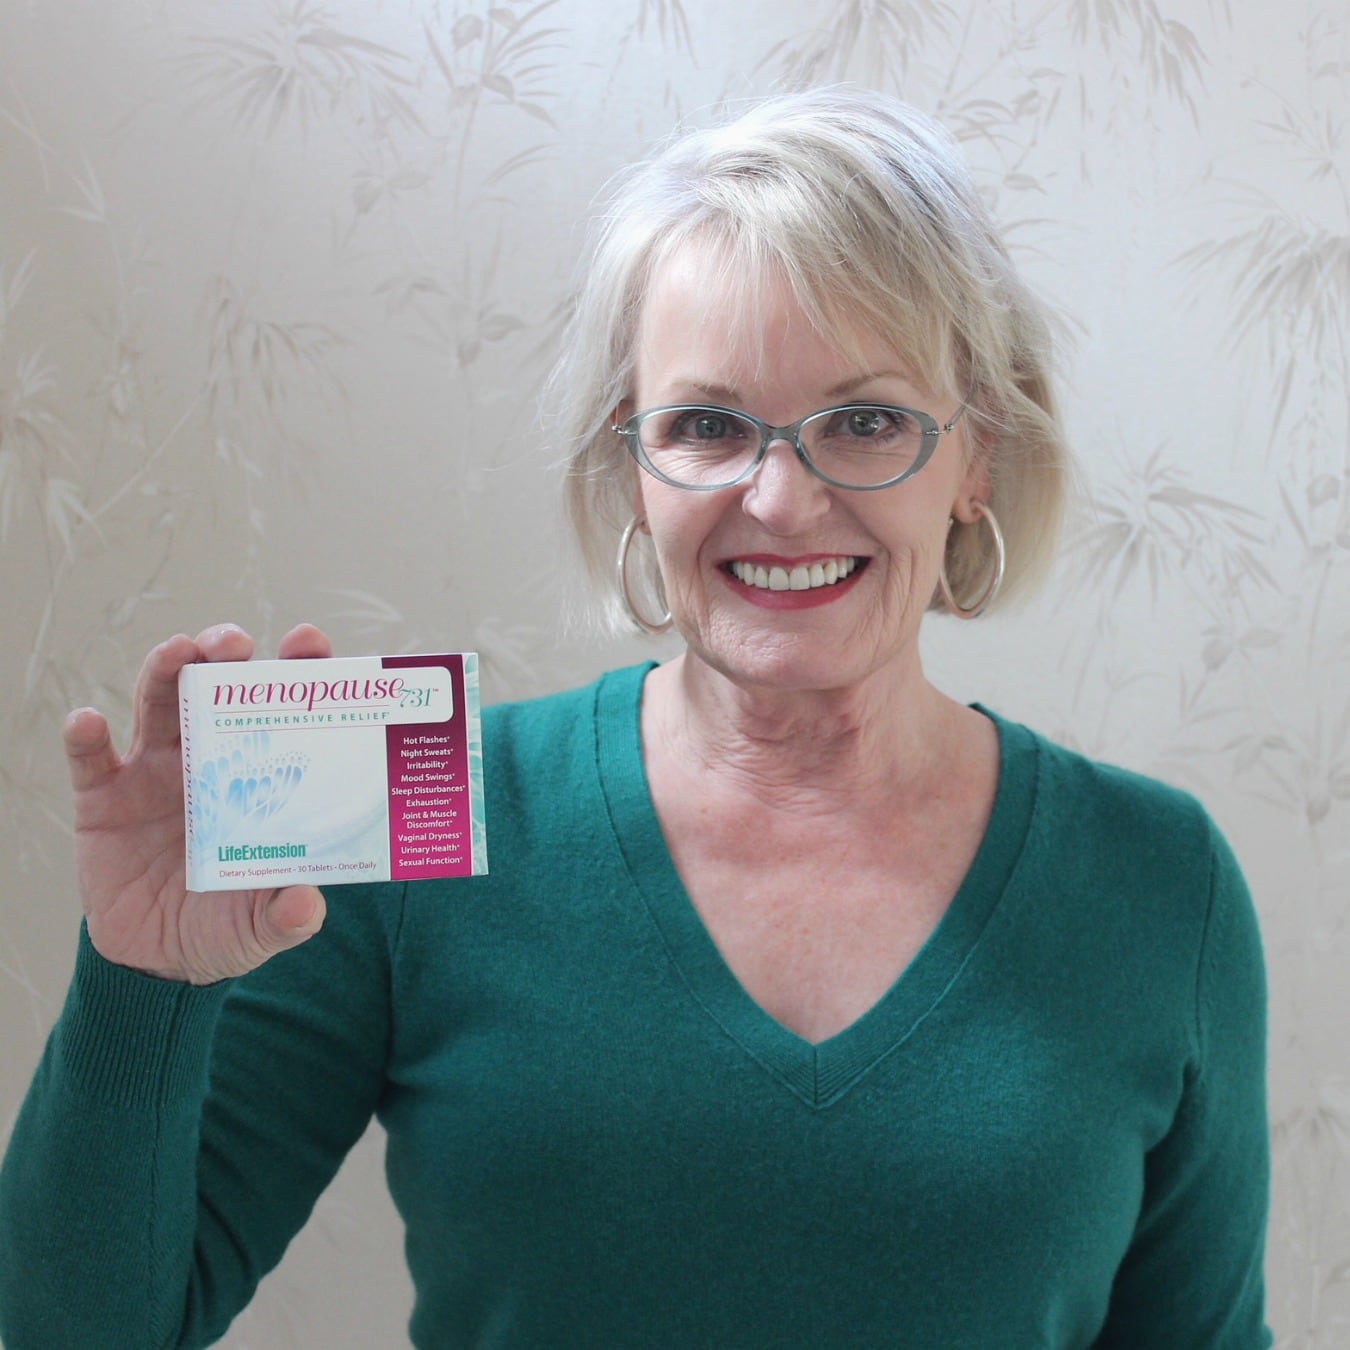 Jennifer Connolly of A Well Styled Life trying Menopause 731 supplement